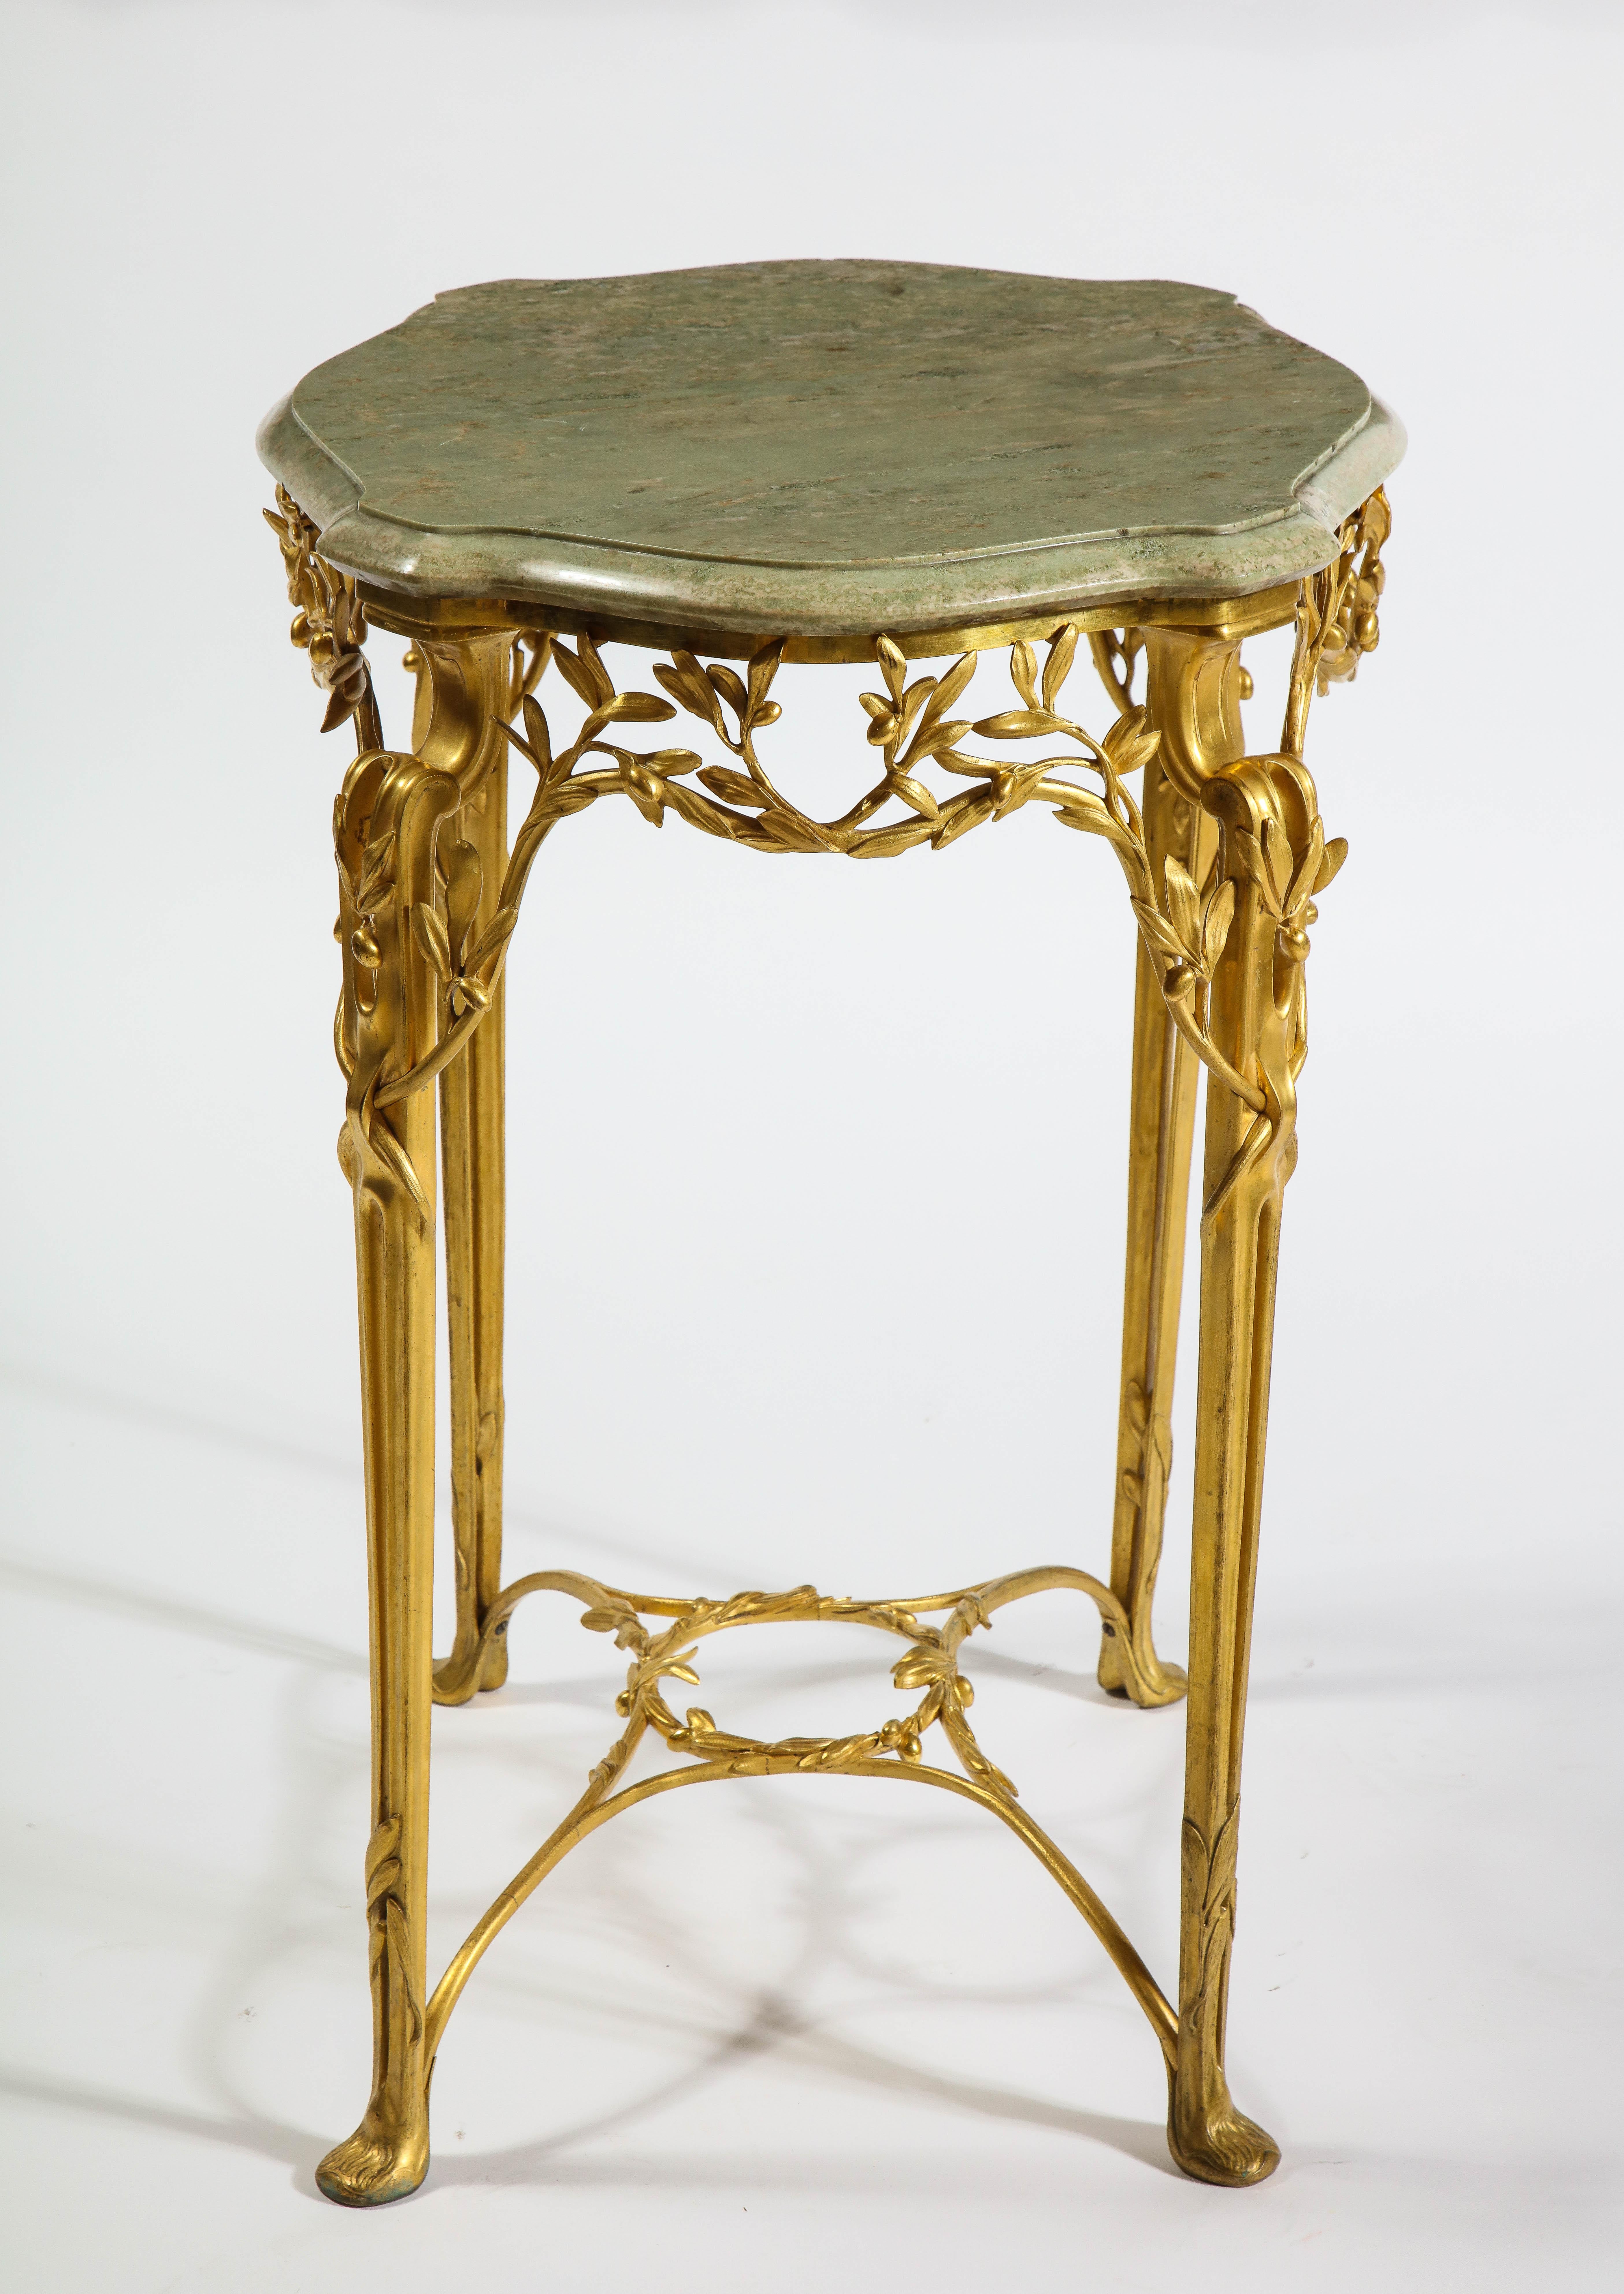 Hand-Carved Center Table by Tiffany and Co., Dore Bronze and Marble Top, Signed, Early 1900s For Sale